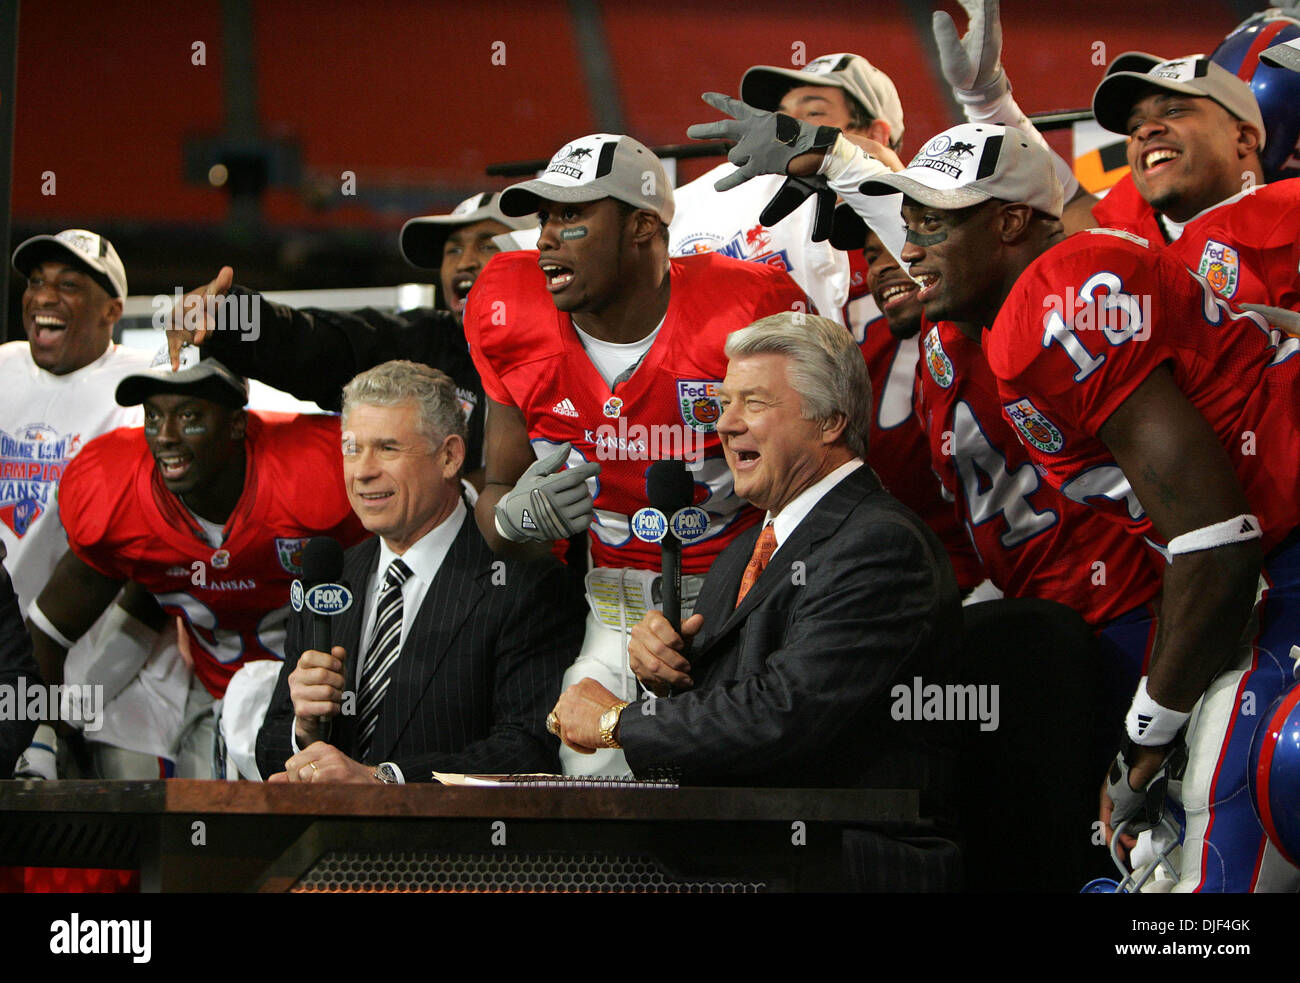 Jan 03, 2008 - Miami, Florida, USA - Kansas players take over the Fox television set after their win in the Orange Bowl during the third quarter Thursday night at Orange Bowl in Miami, Florida. (Credit Image: © Allen Eyestone/Palm Beach Post/ZUMA Press) RESTRICTIONS: * USA Tabloids Rights OUT * Stock Photo